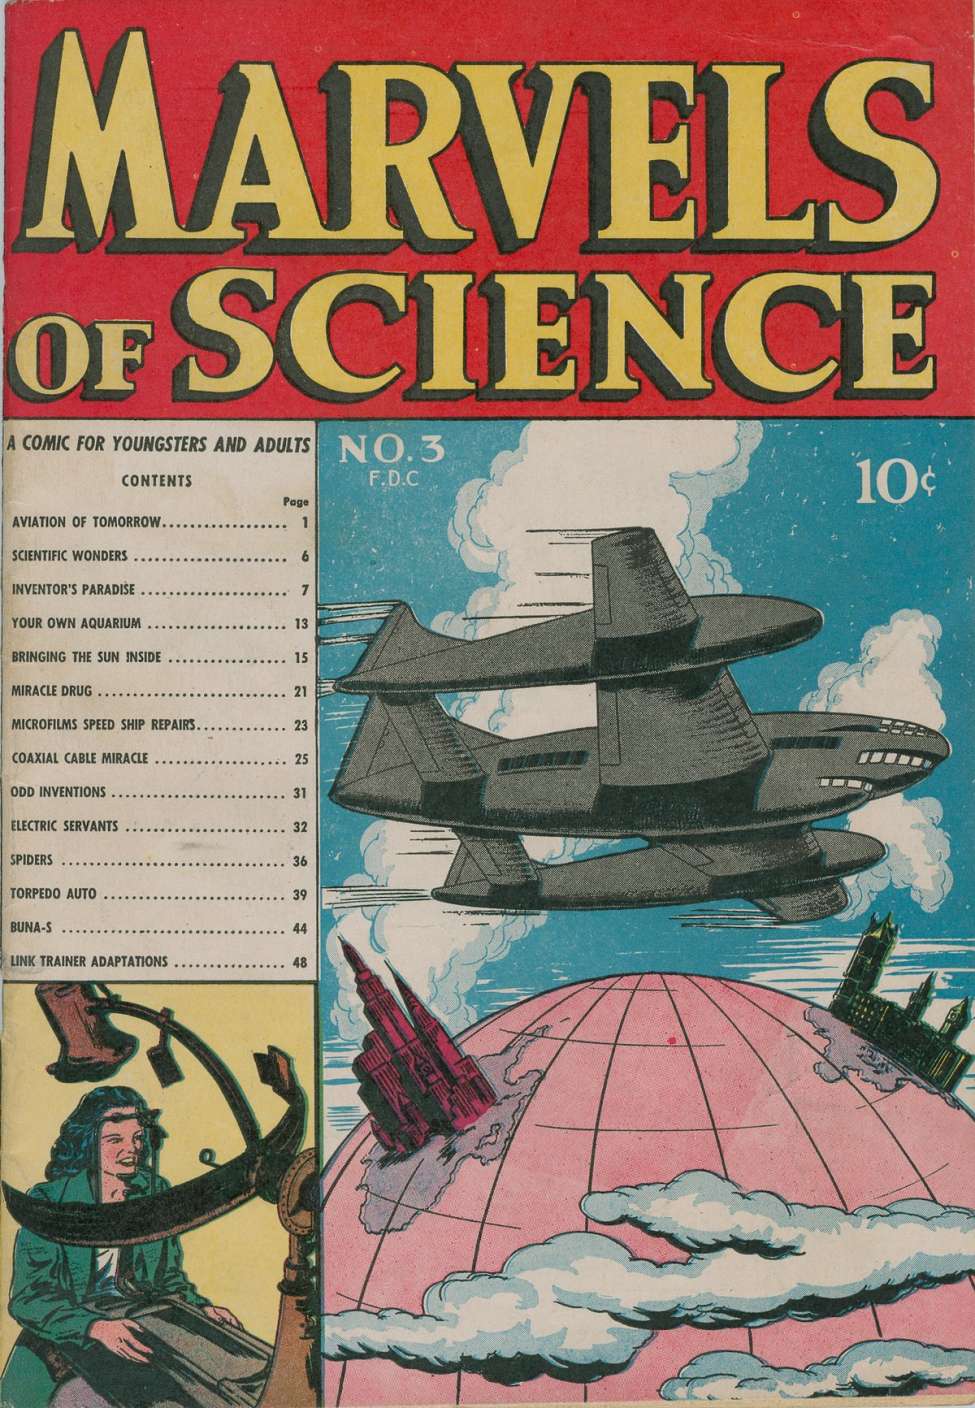 Book Cover For Marvels of Science 3